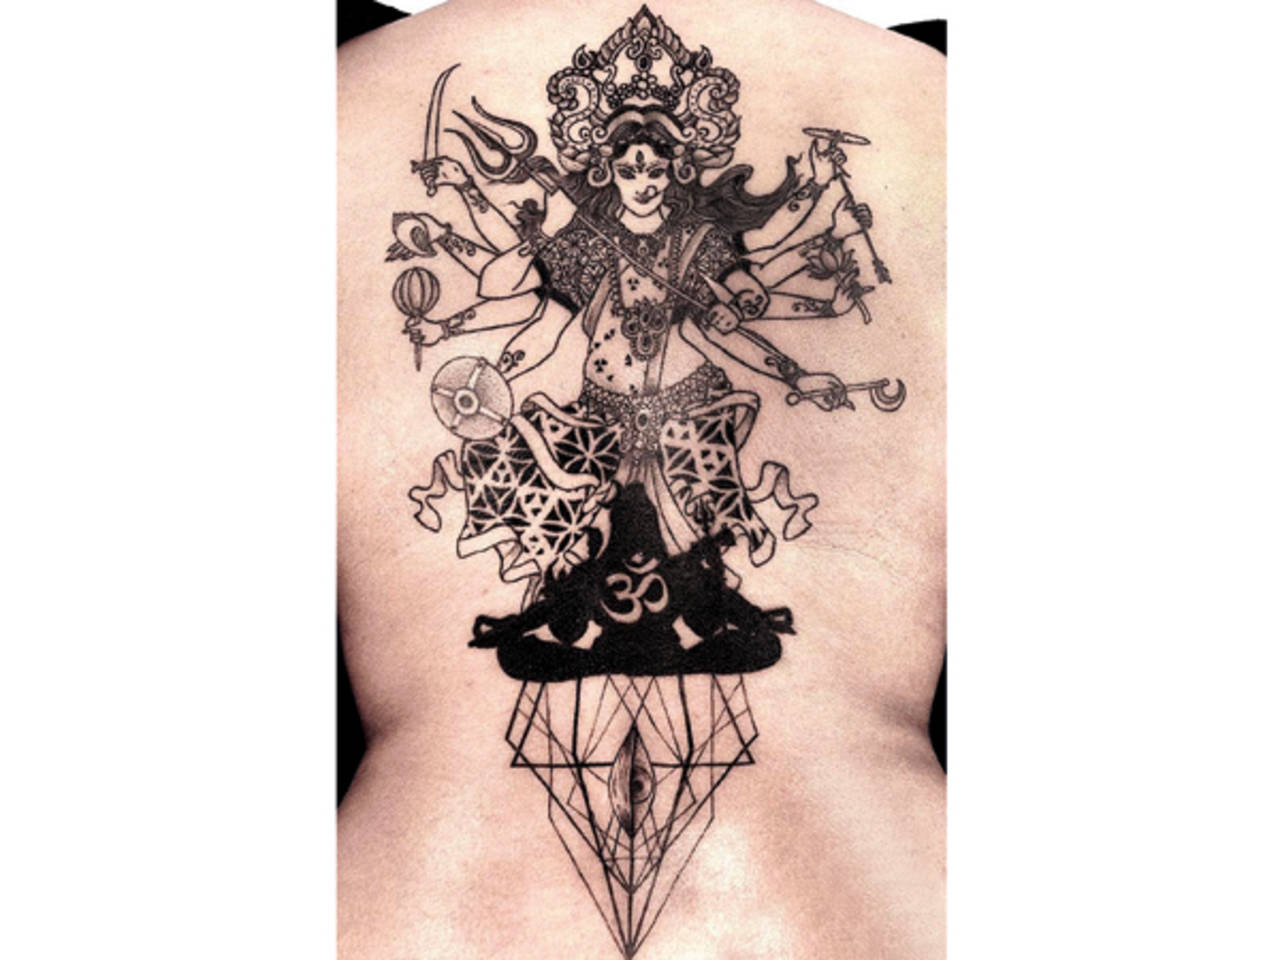 Naksh Tattoos on Twitter The Hanuman tattoo is considered an especially  powerful one Buddhist tattoo monks have traditionally applied protective  designs to young men Hanumantattooos NakshTattoo Hydreabad  HydreabadiBesttattoosshop Asraonagar 